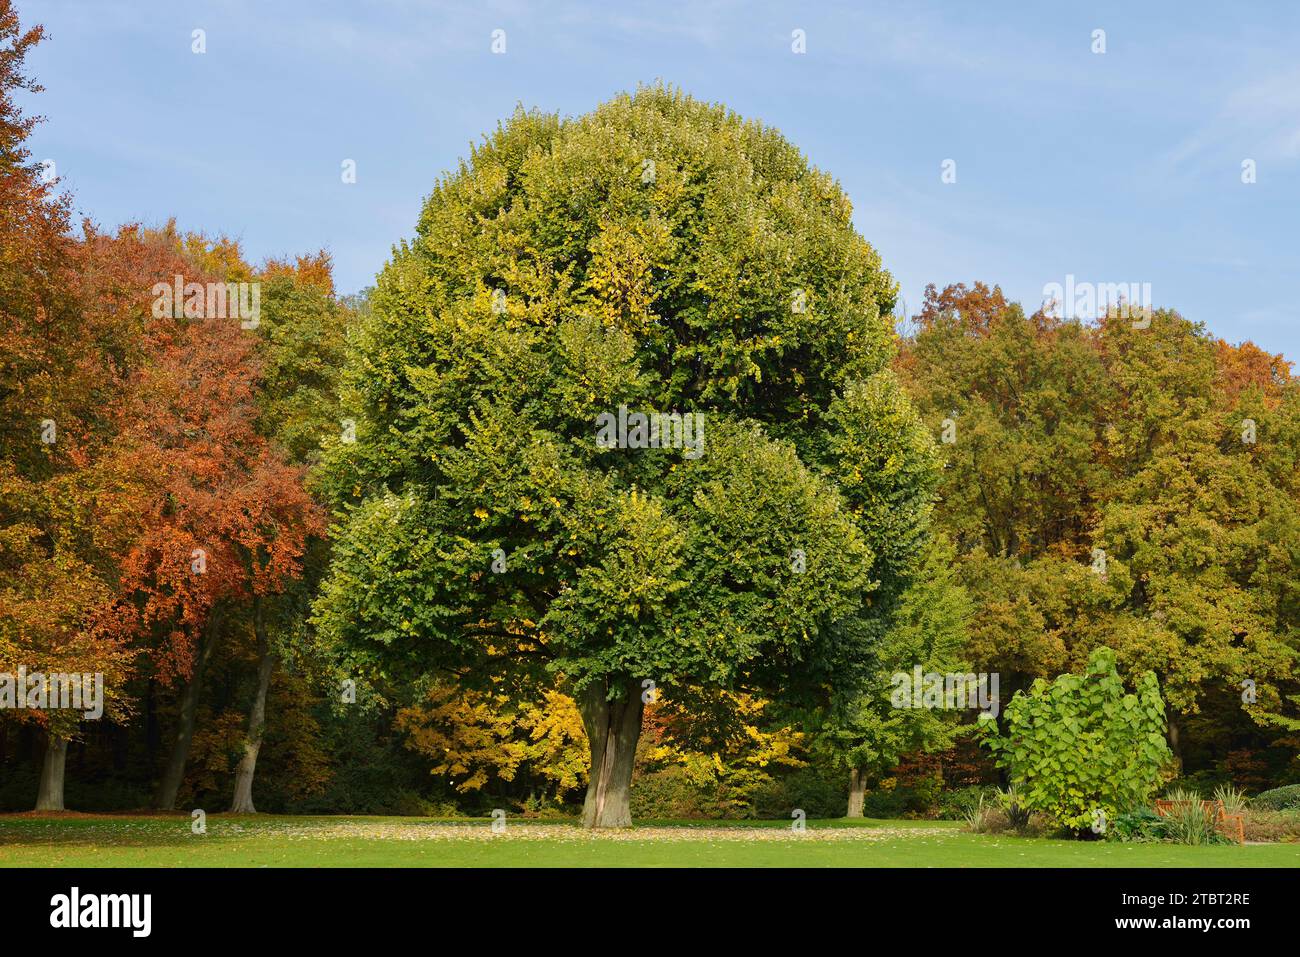 Silver lime (Tilia tomentosa) in fall, North Rhine-Westphalia, Germany Stock Photo